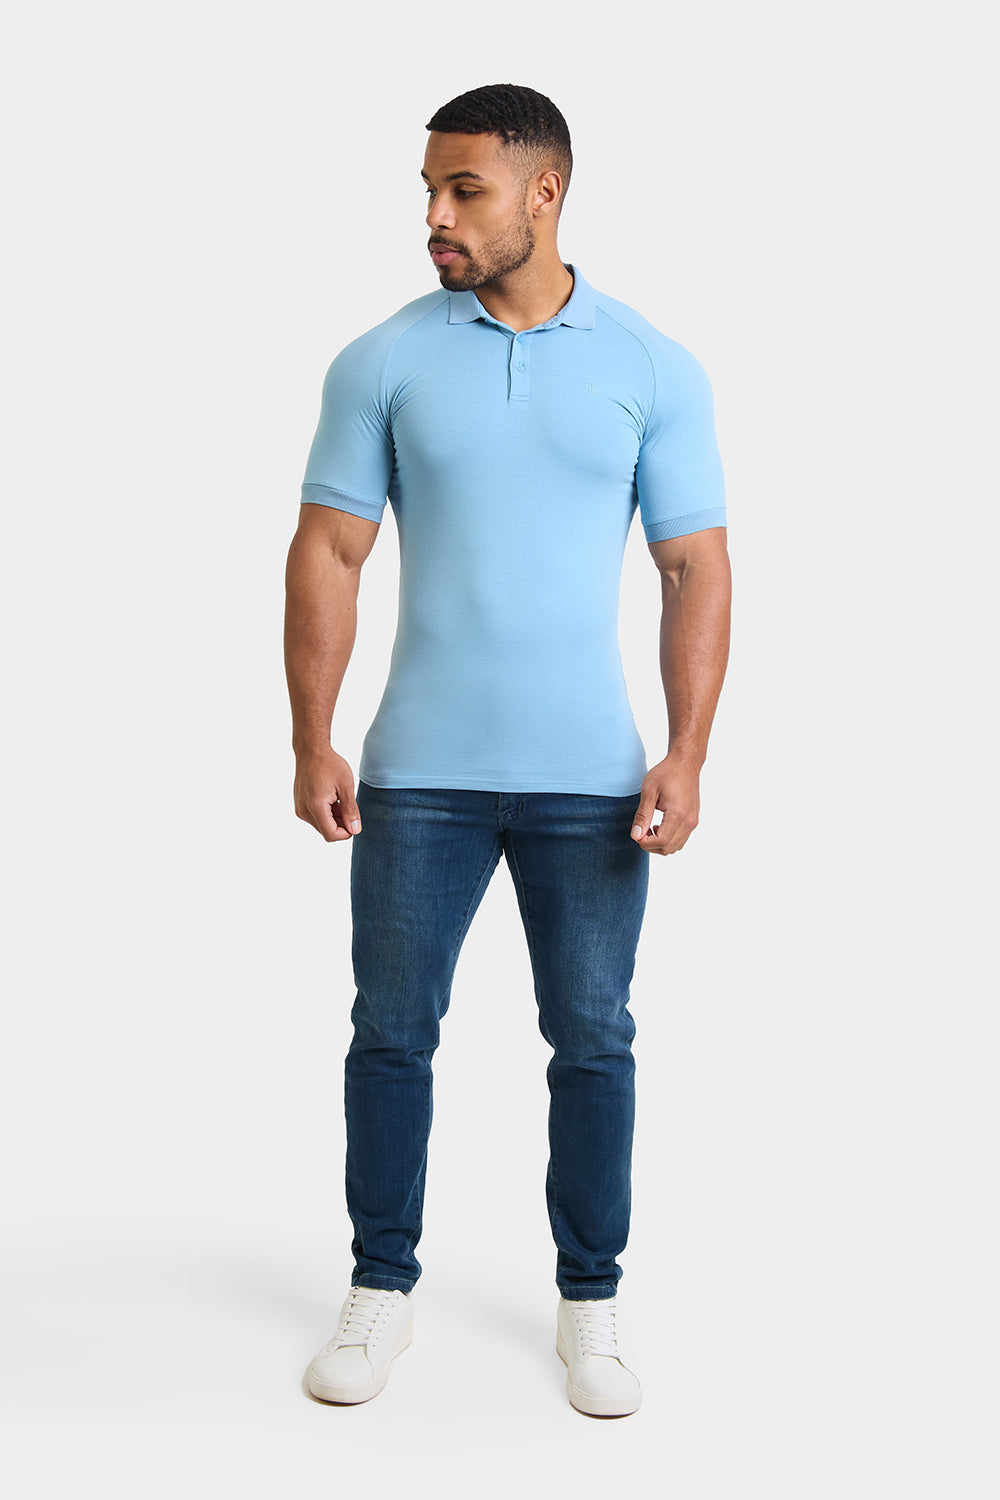 Muscle Fit Polo in Mist Blue - TAILORED ATHLETE - ROW